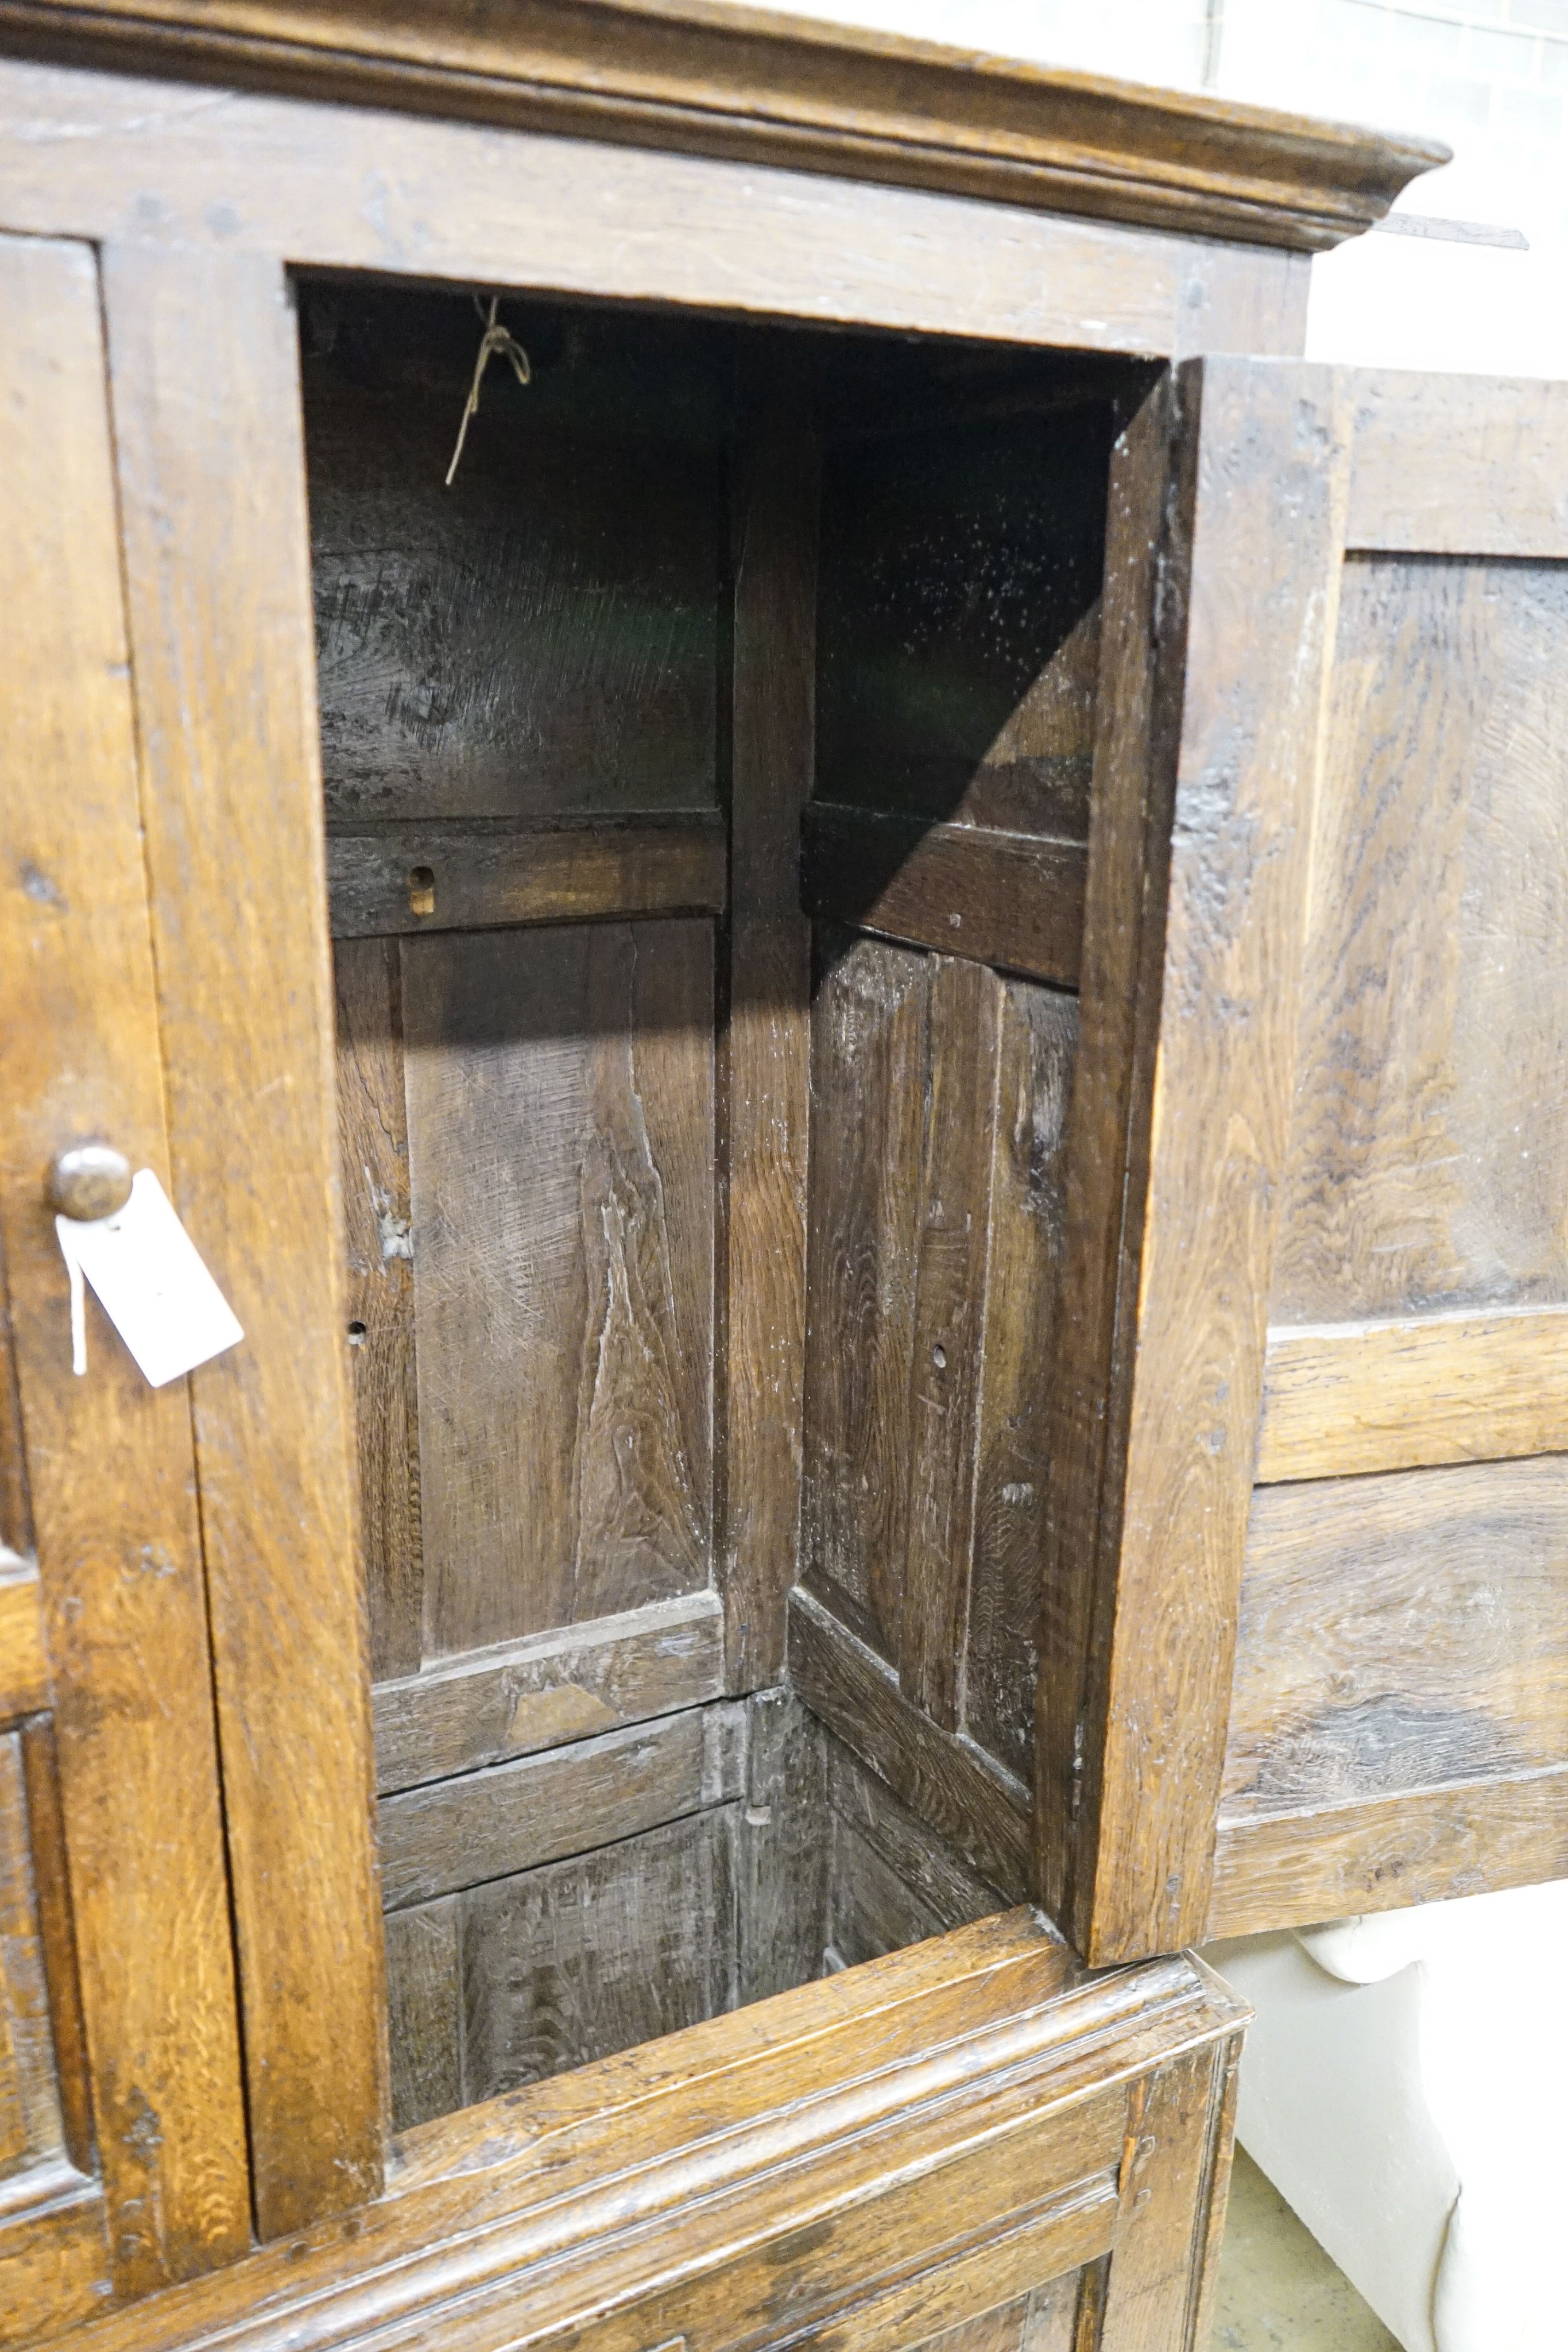 A 17th century style oak press cupboard, with three panelled doors, width 108cm, depth 50cm, height 172cm